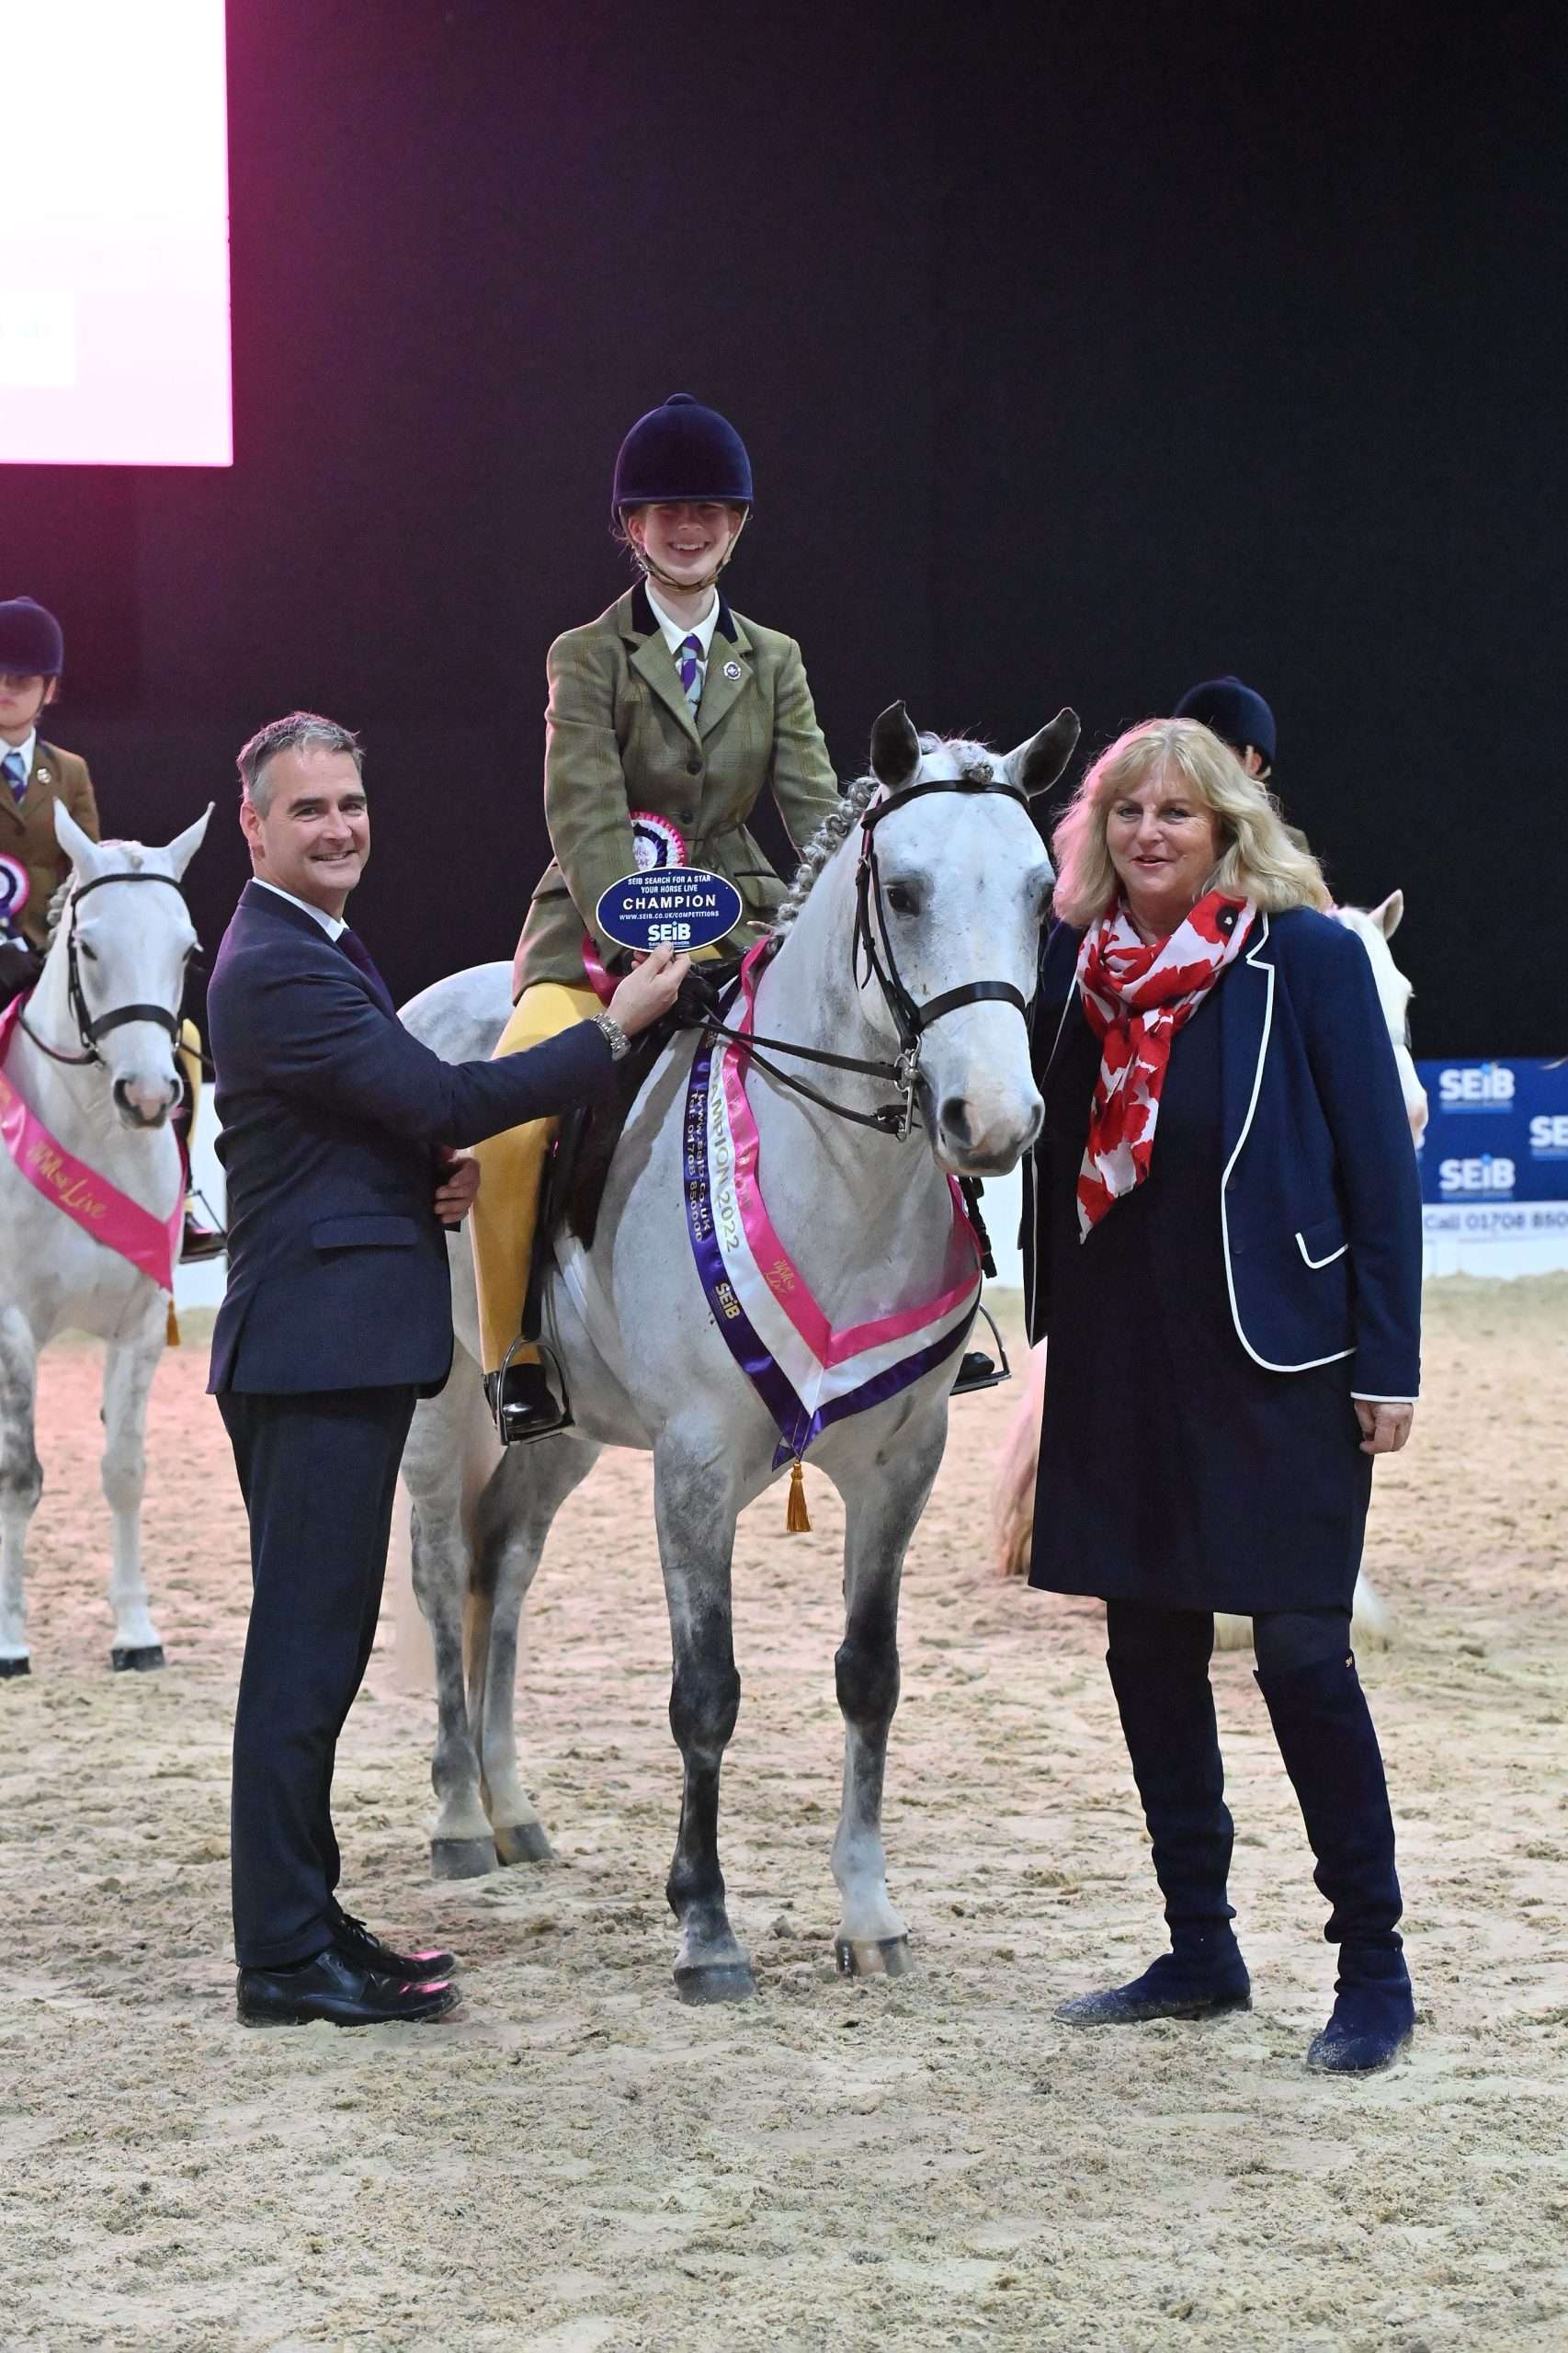 In the open Pony Club Search for a Star championship, Mid Surrey member, Helena Kitchener riding Naomi Kitchener’s grey Connemara, Cavan Mick took the win